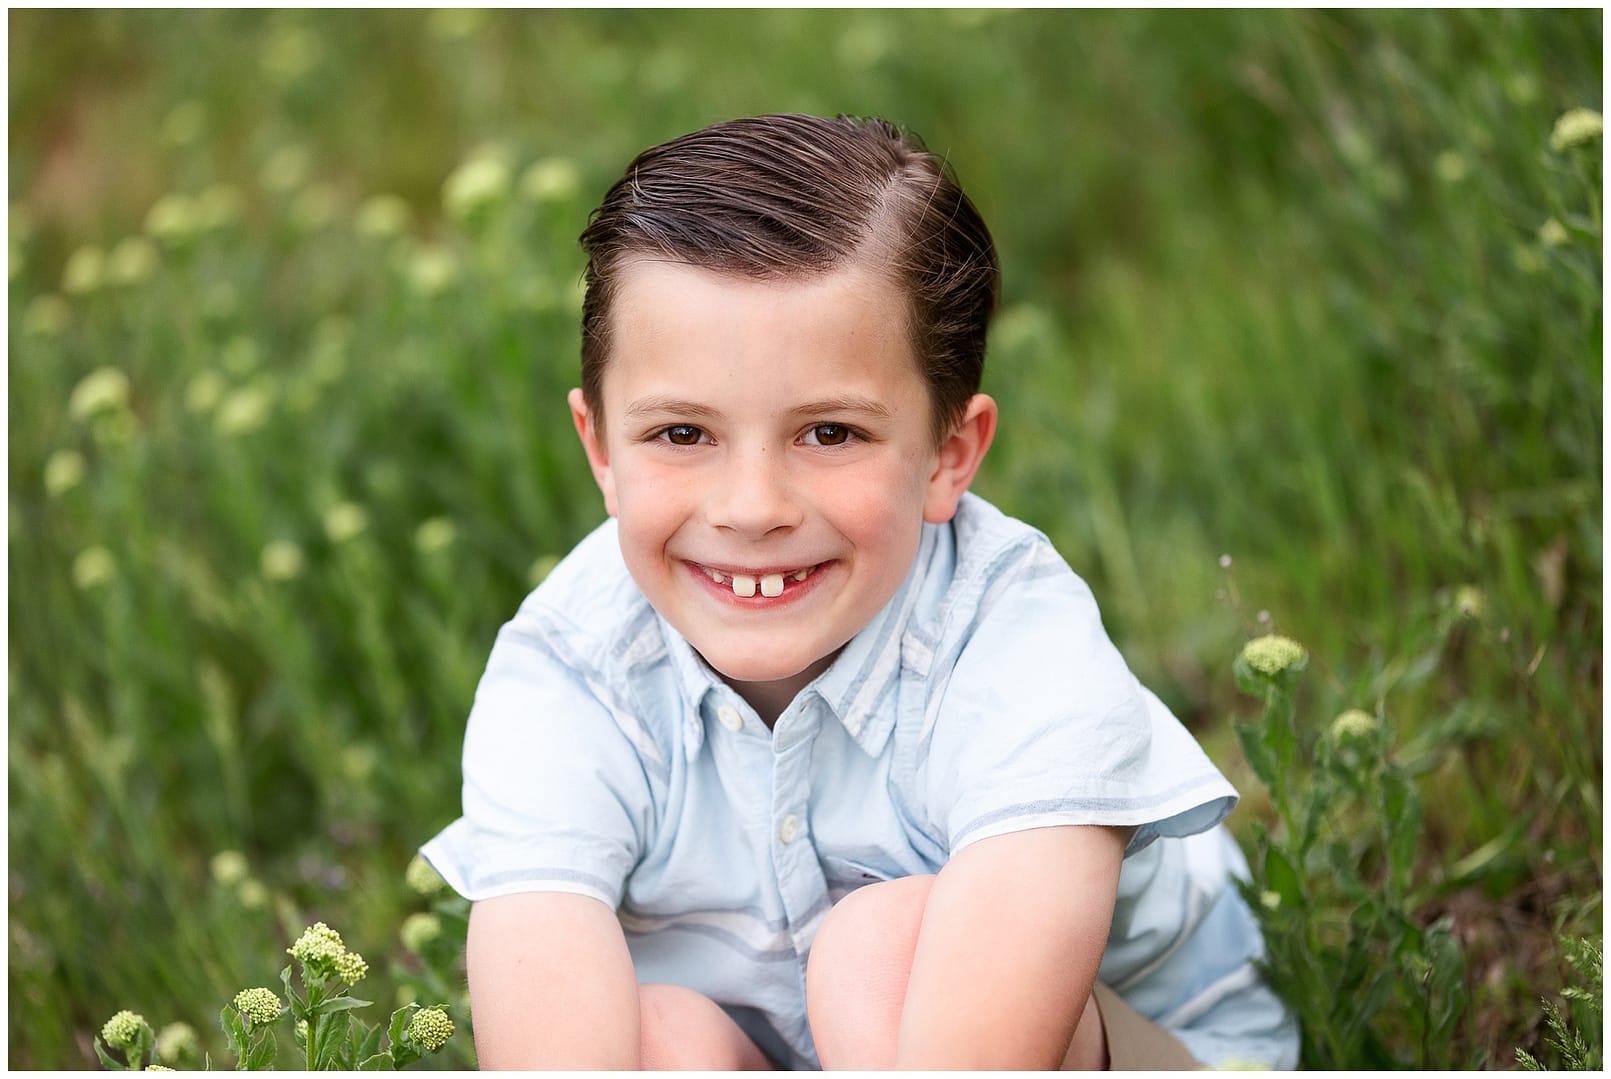 8 year old smiles for camera in Meridian, ID. Photo by Tiffany Hix Photography.